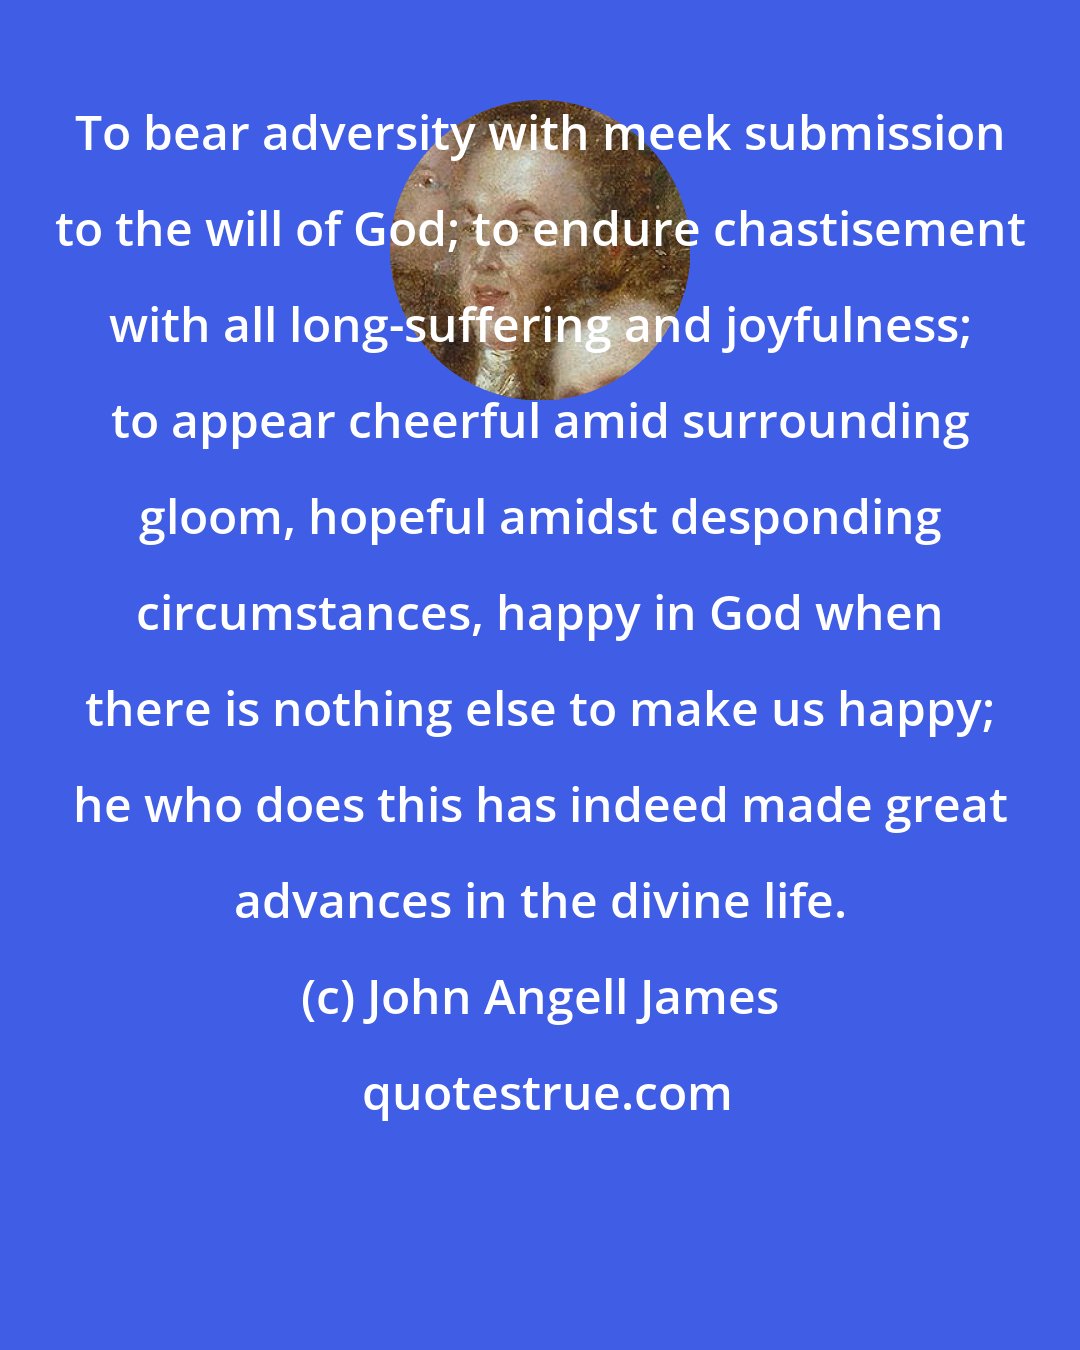 John Angell James: To bear adversity with meek submission to the will of God; to endure chastisement with all long-suffering and joyfulness; to appear cheerful amid surrounding gloom, hopeful amidst desponding circumstances, happy in God when there is nothing else to make us happy; he who does this has indeed made great advances in the divine life.